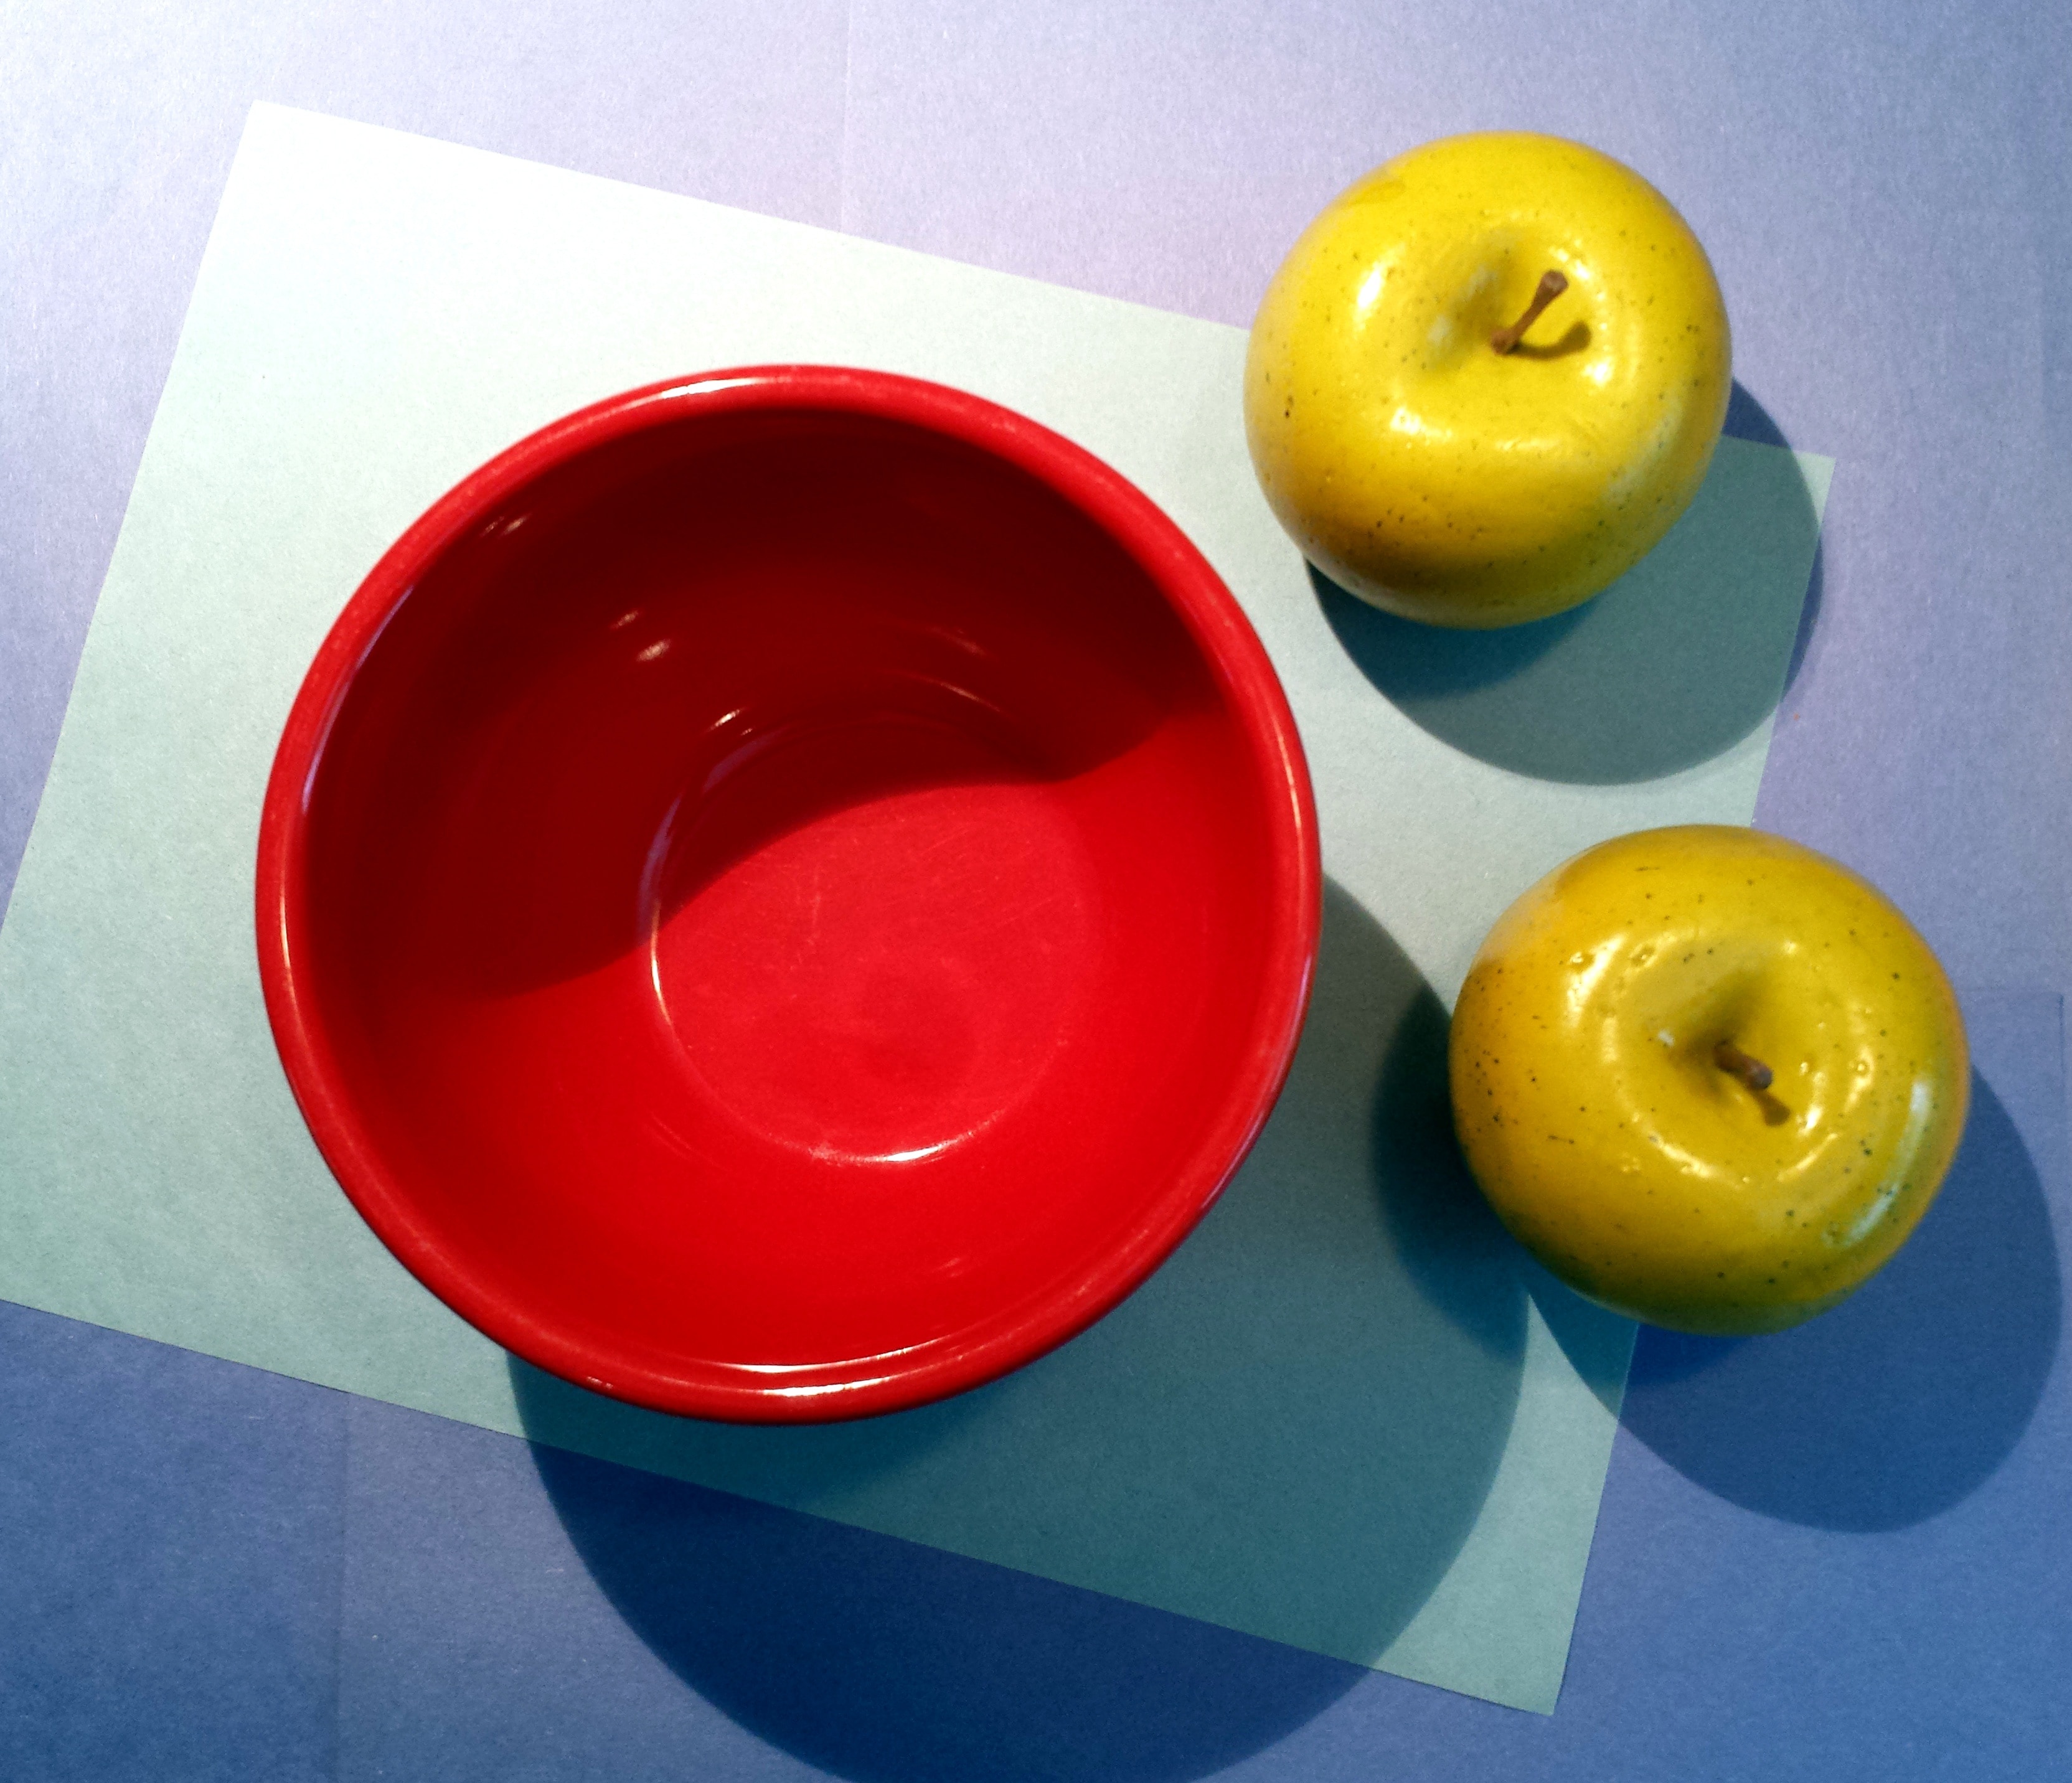 two green apple fruits near round red bowl